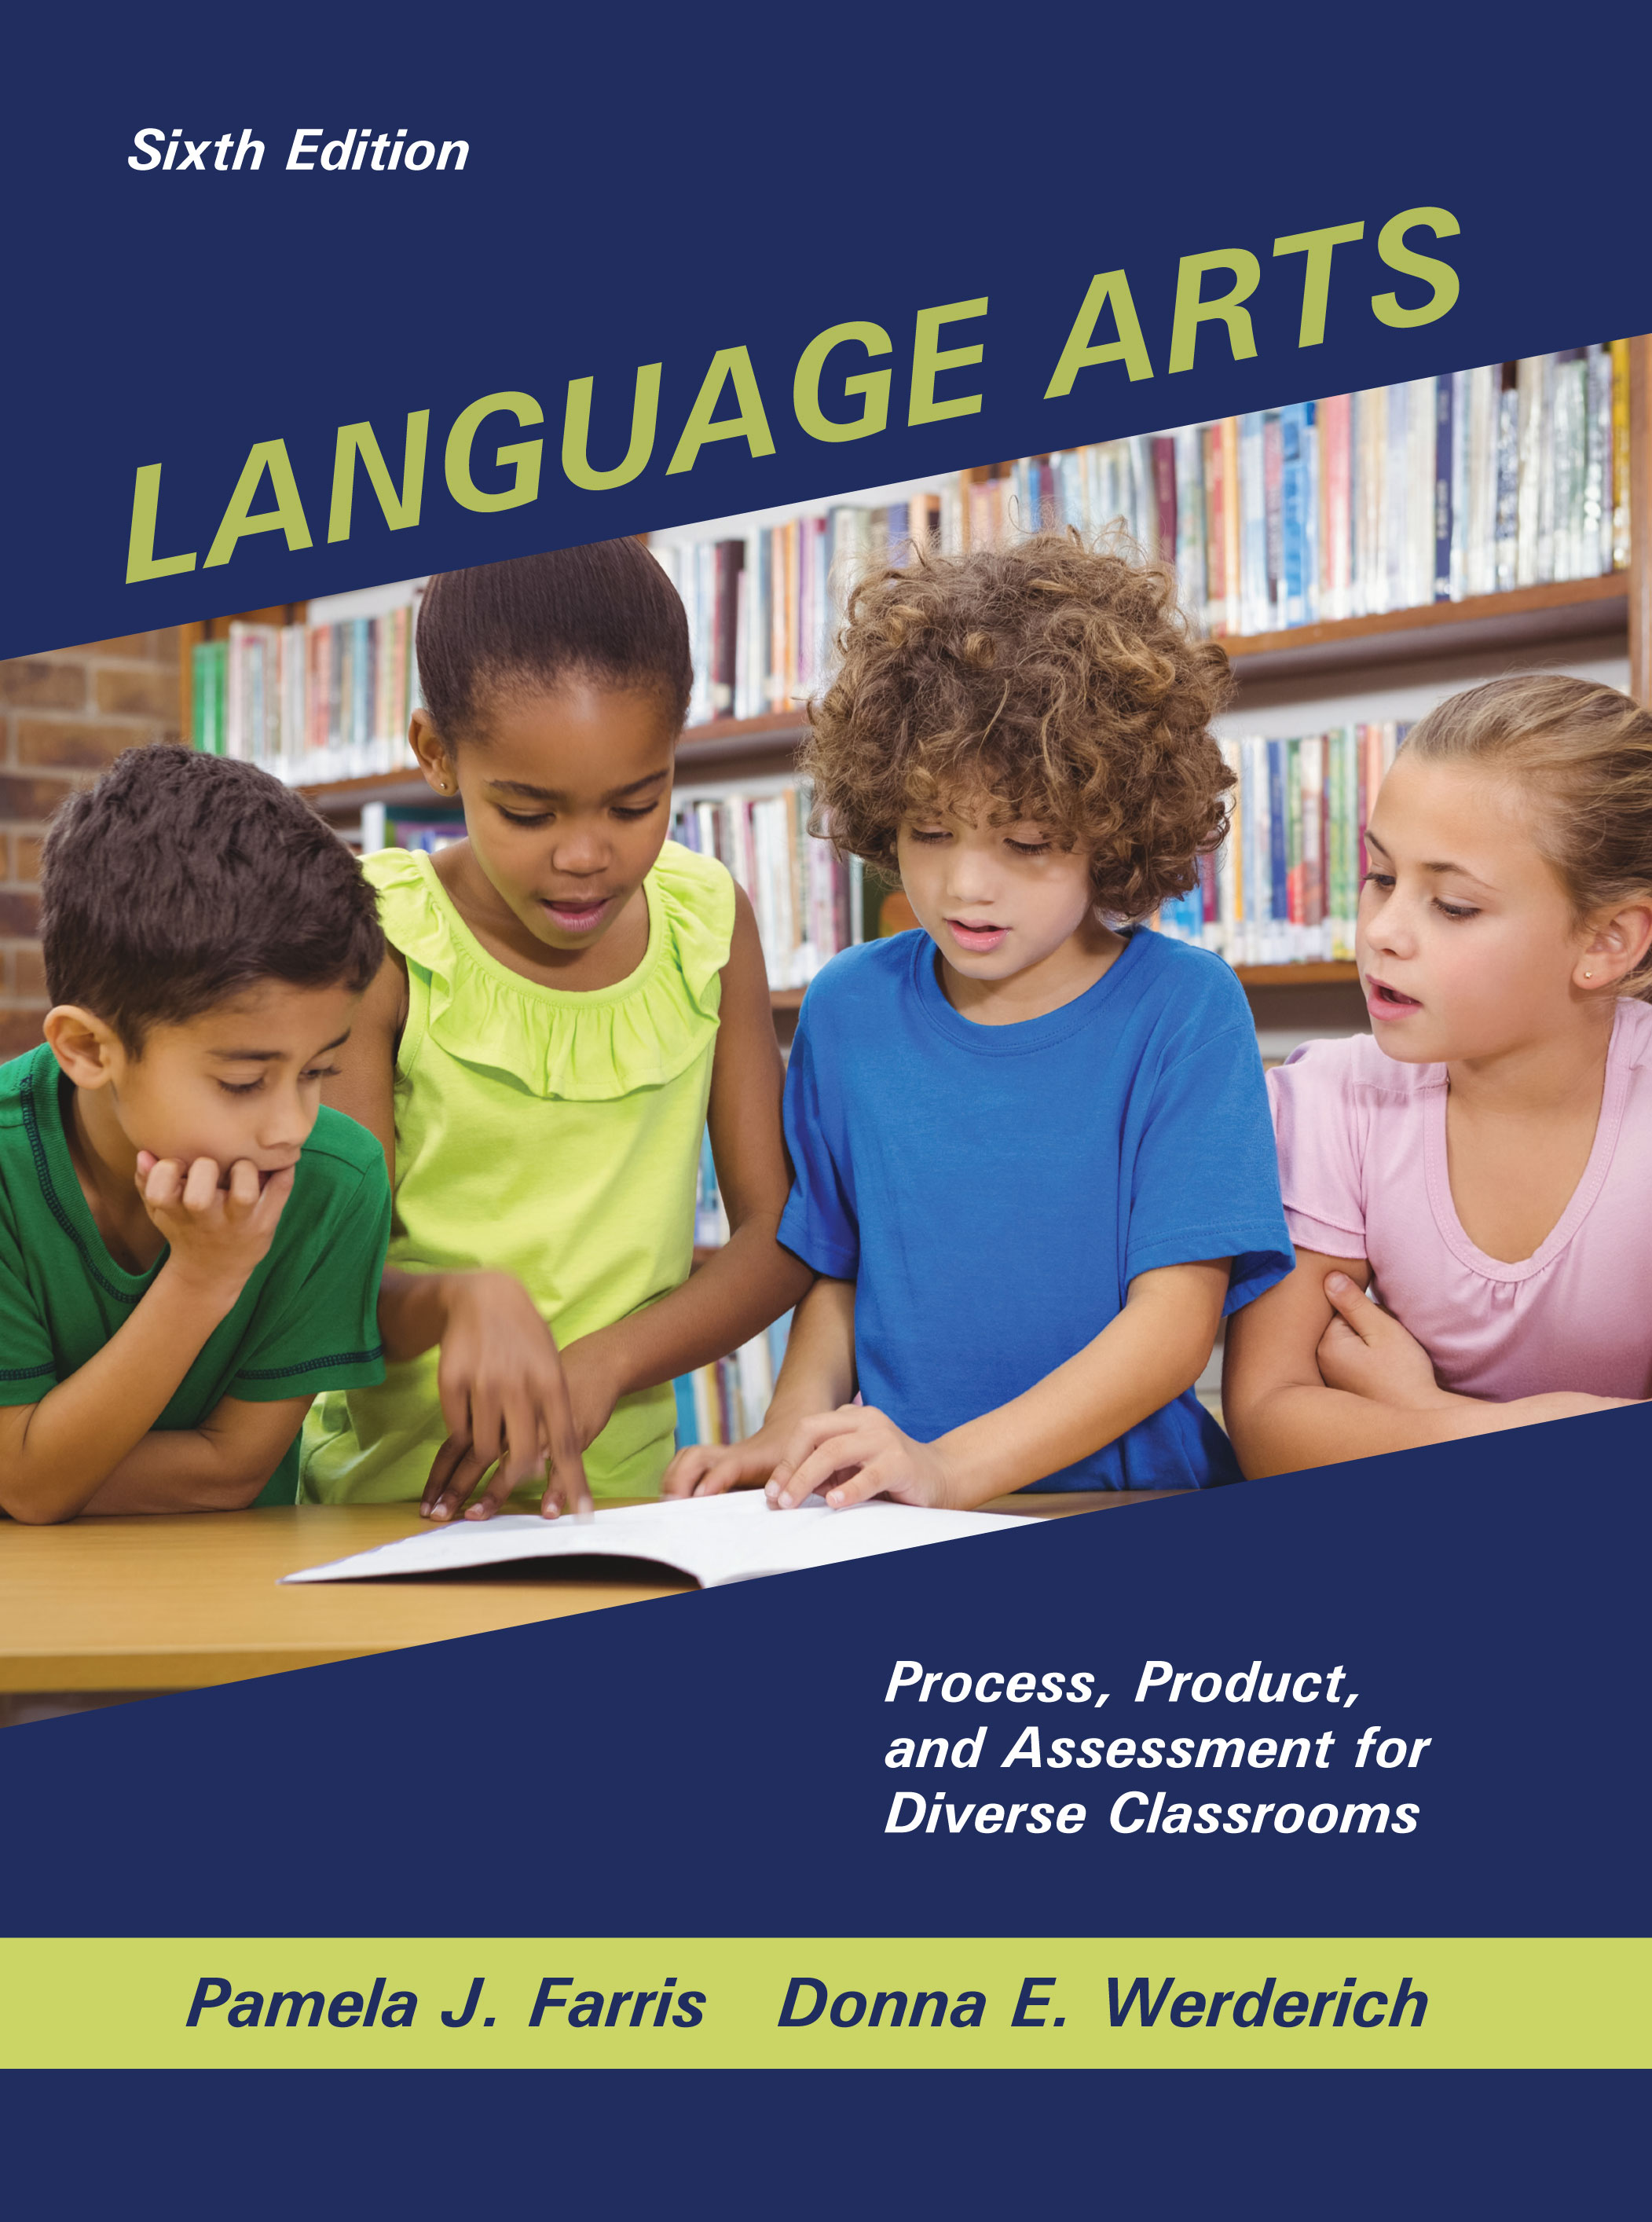 Language Arts: Process, Product, and Assessment for Diverse Classrooms by Pamela J. Farris, Donna E. Werderich